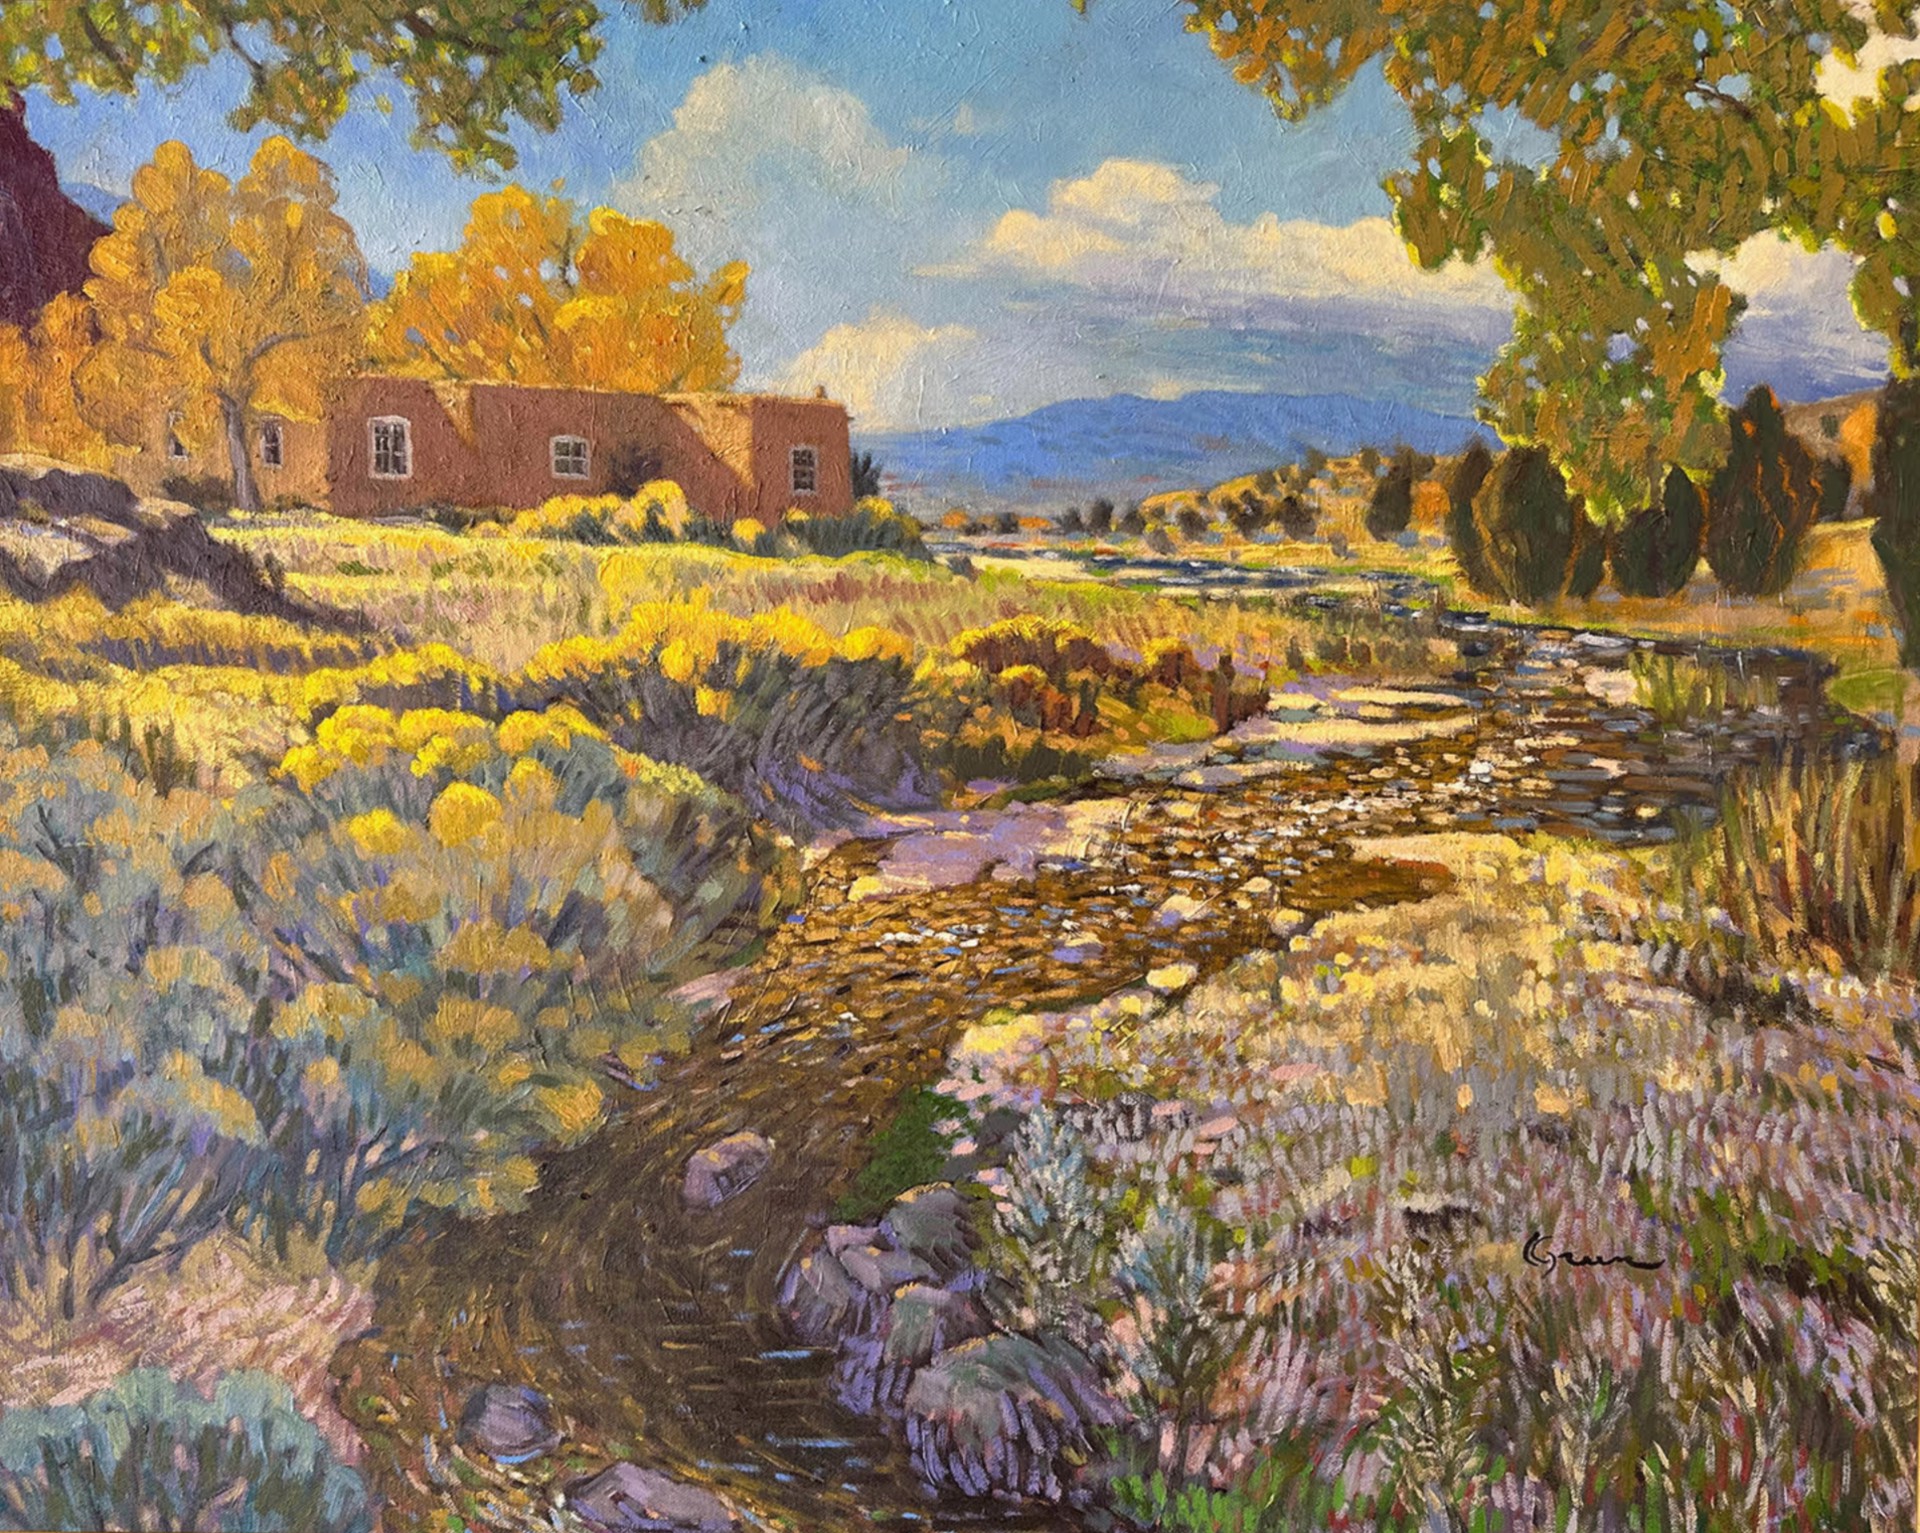 Home By the Creek by Kenneth Green